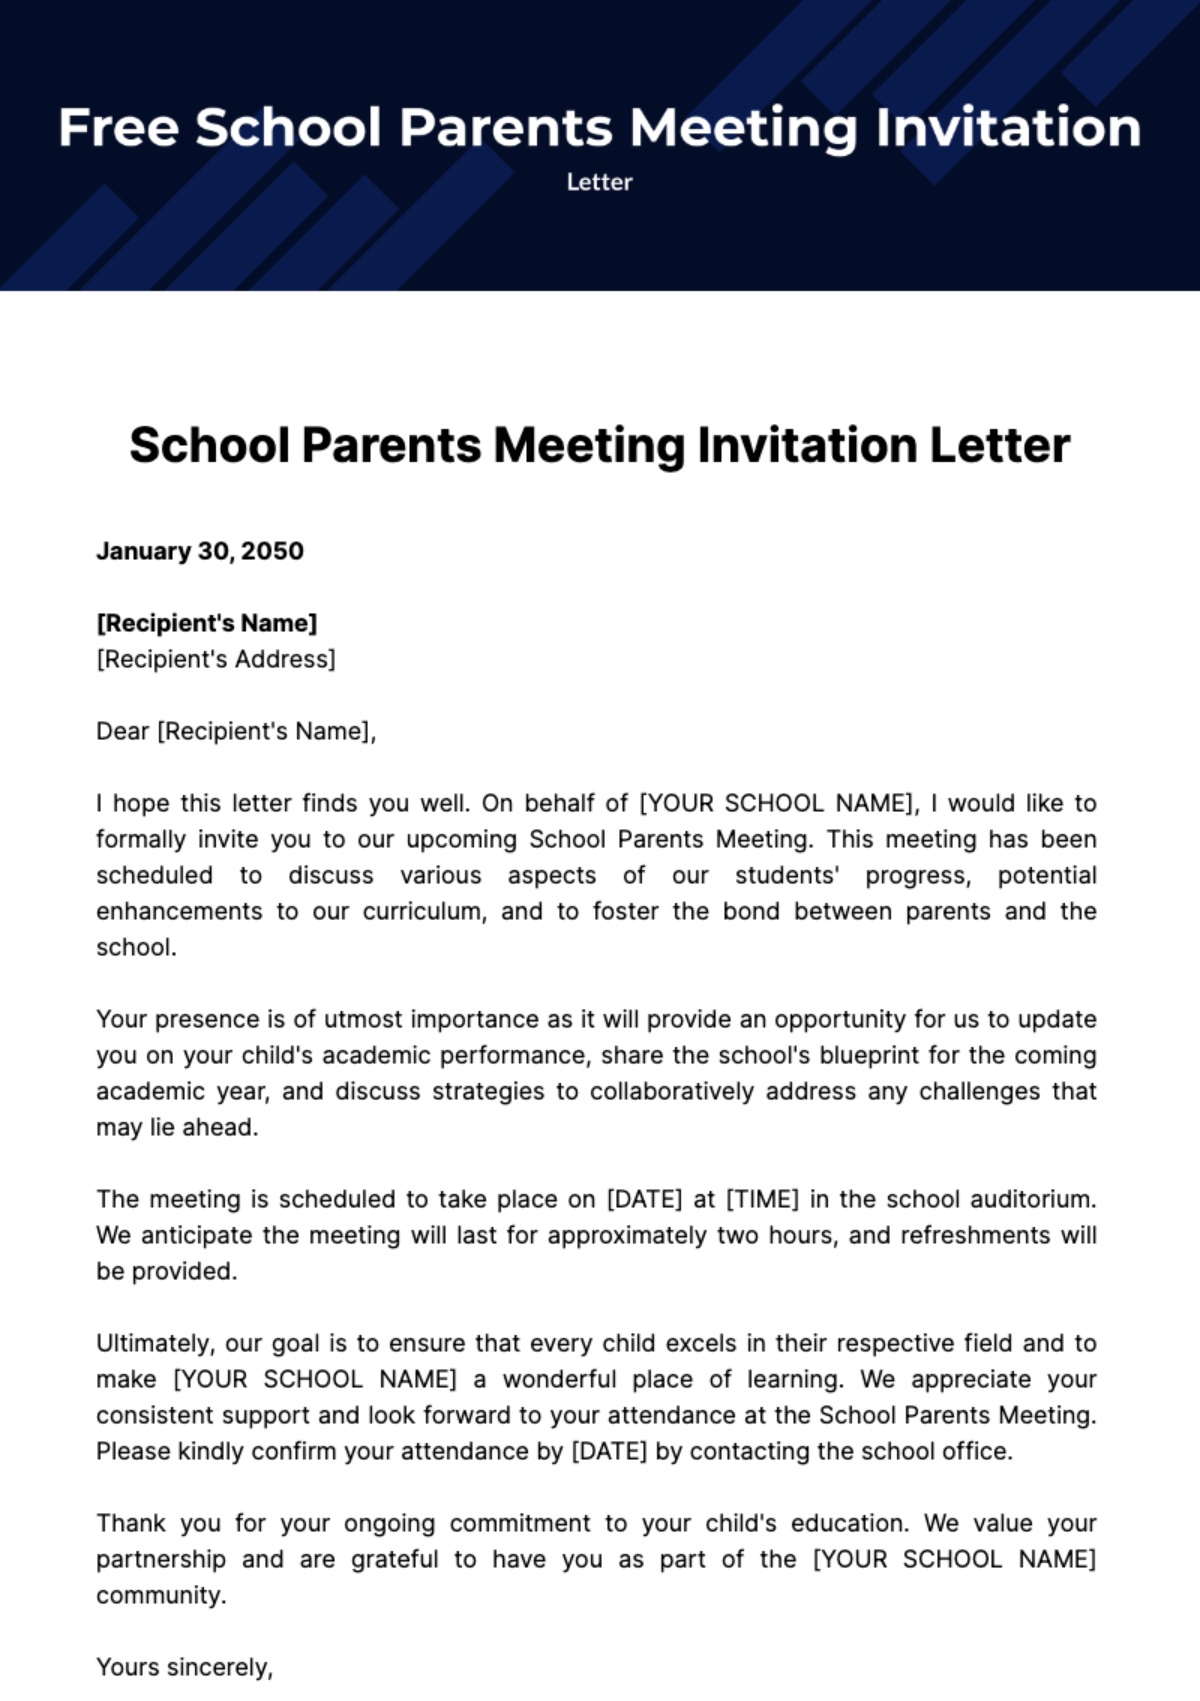 Free School Parents Meeting Invitation Letter Template